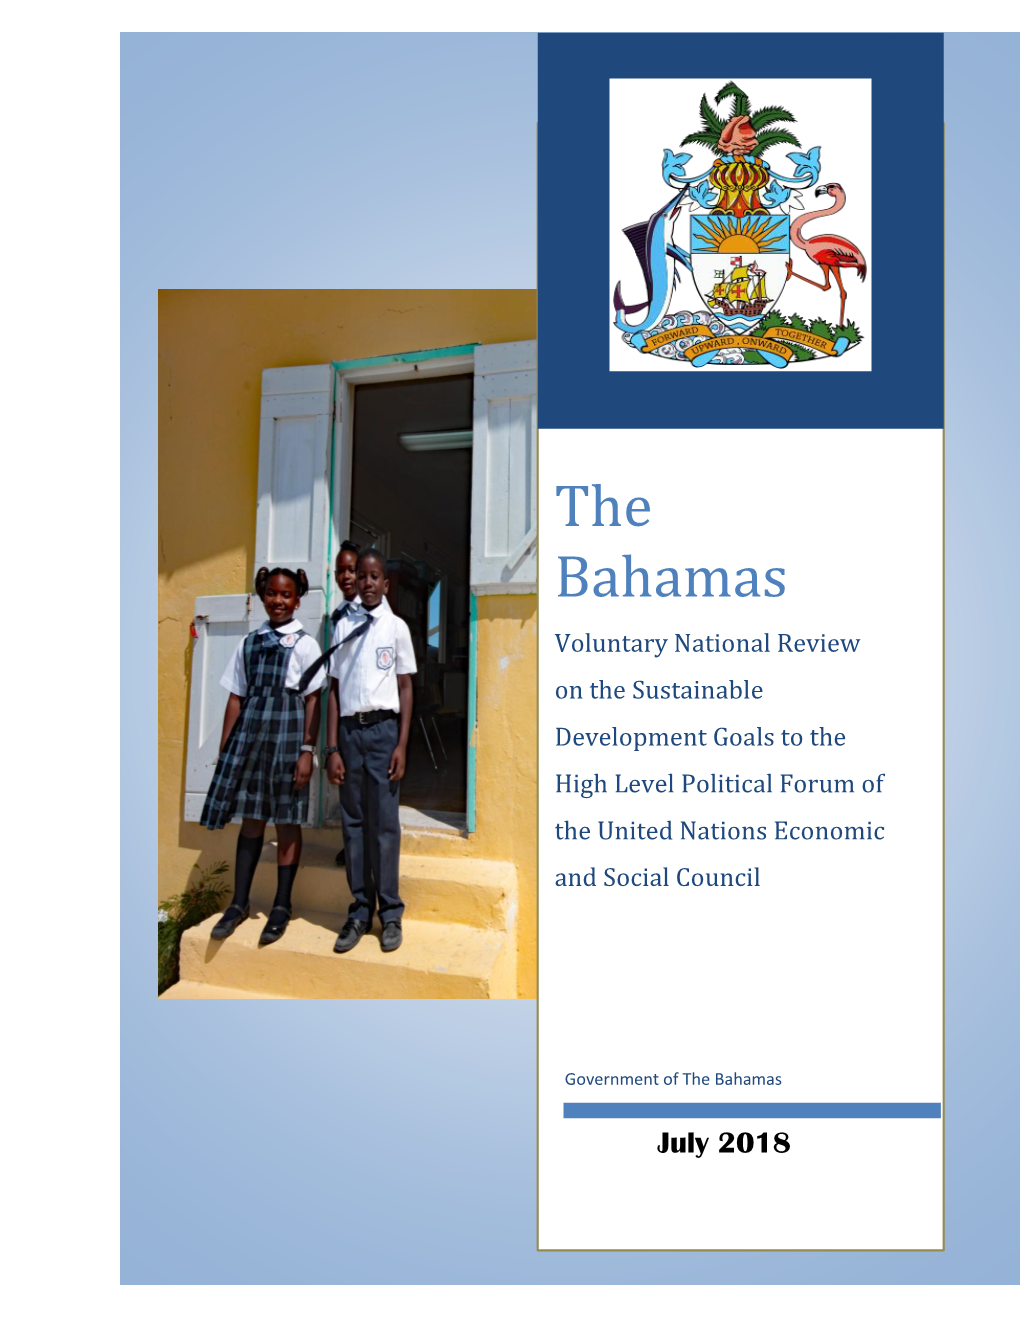 The Bahamas Voluntary National Review on the Sustainable Development Goals to the High Level Political Forum of the United Nations Economic and Social Council